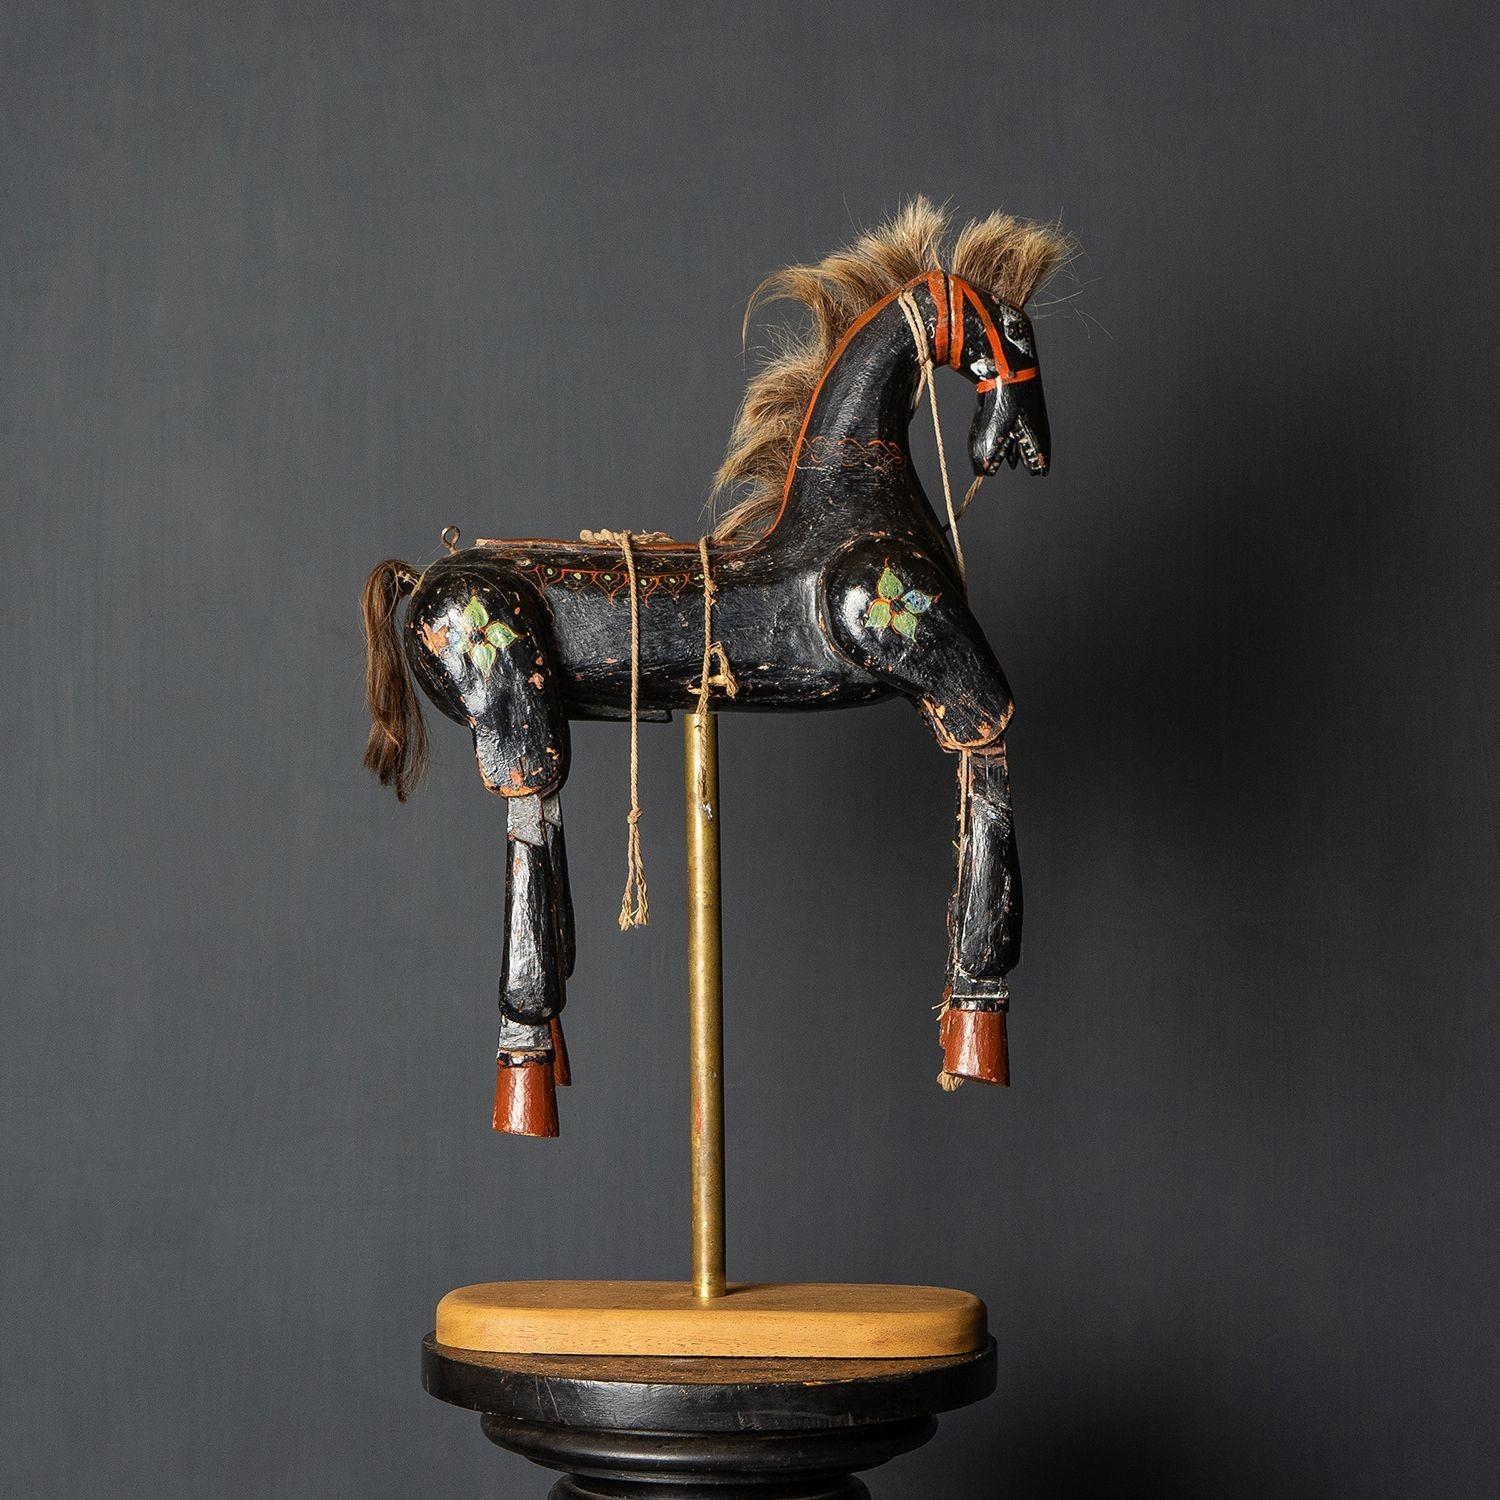 Wood Antique Folk Art Carved And Painted Articulated Horse Puppet